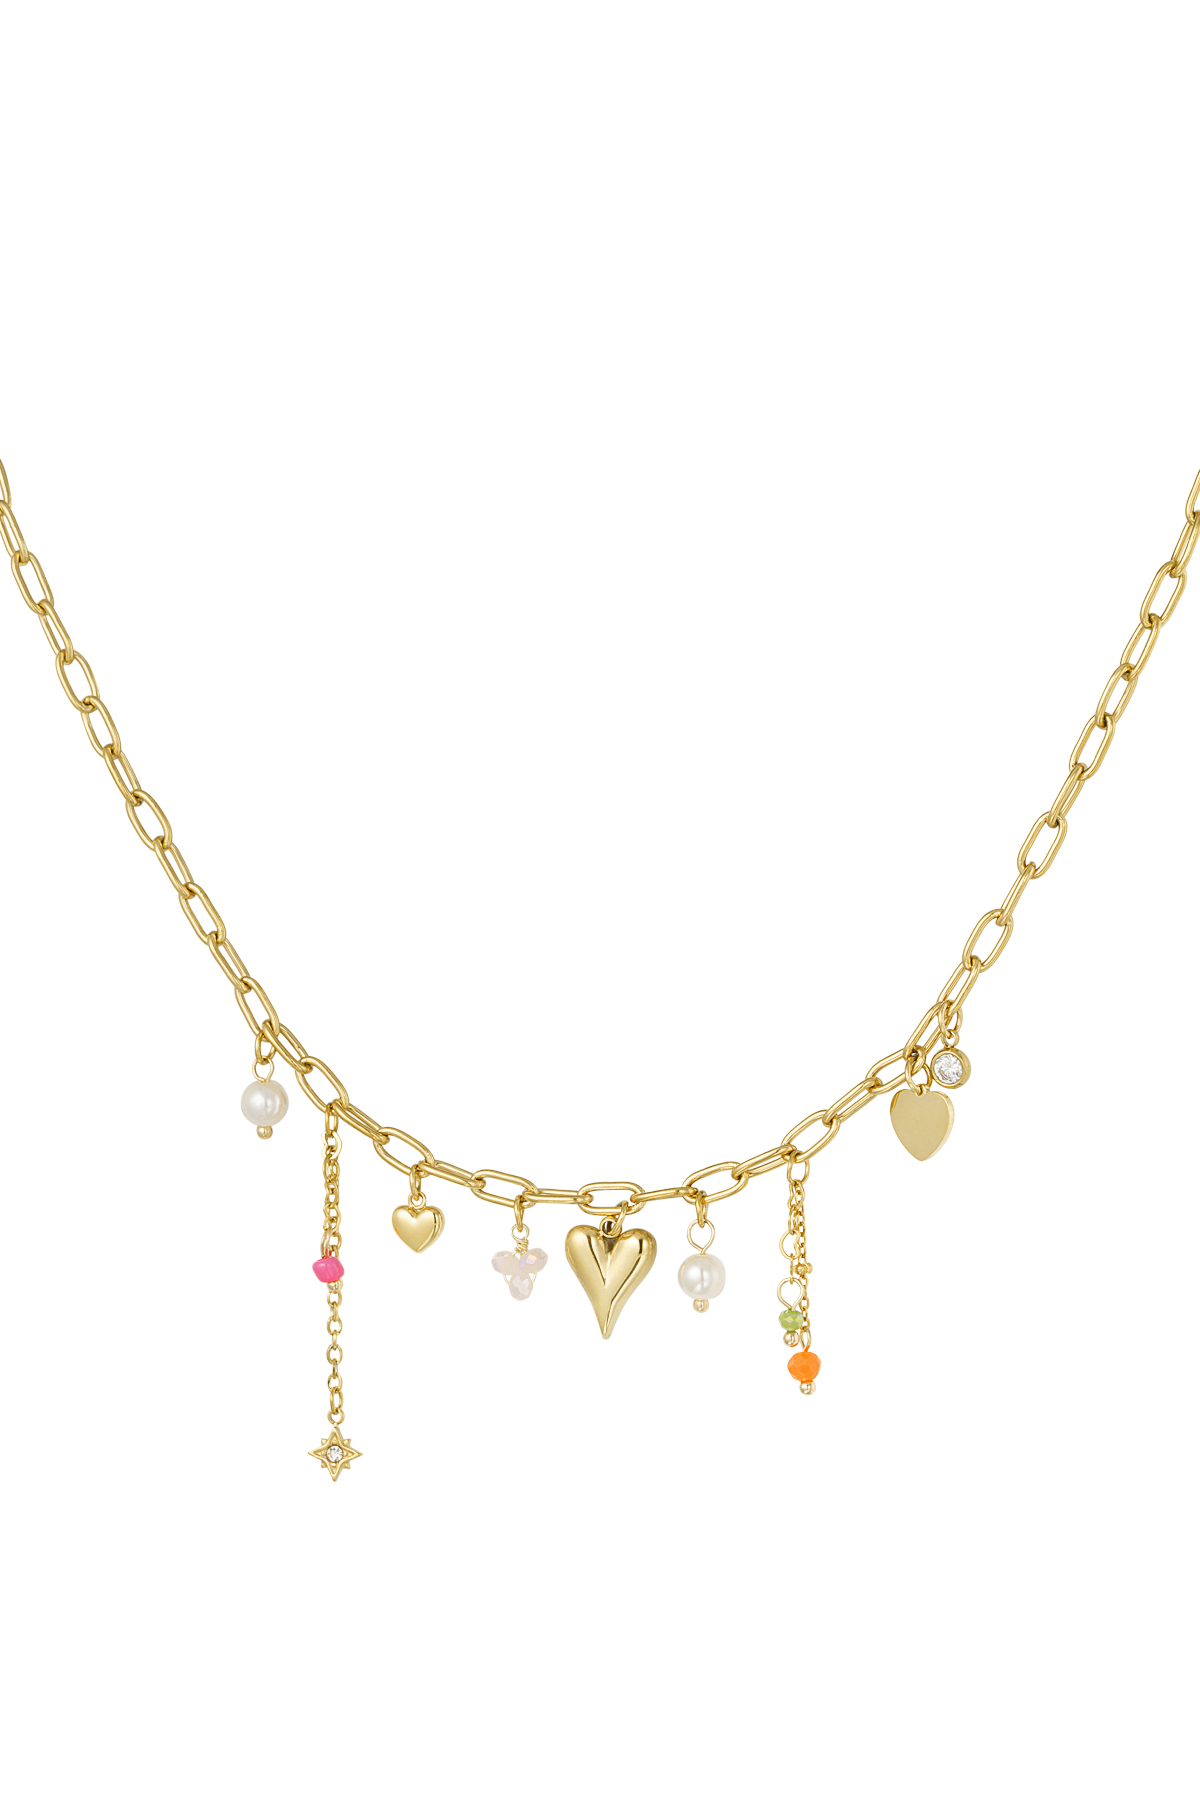 Bedelketting amore color - goud h5 